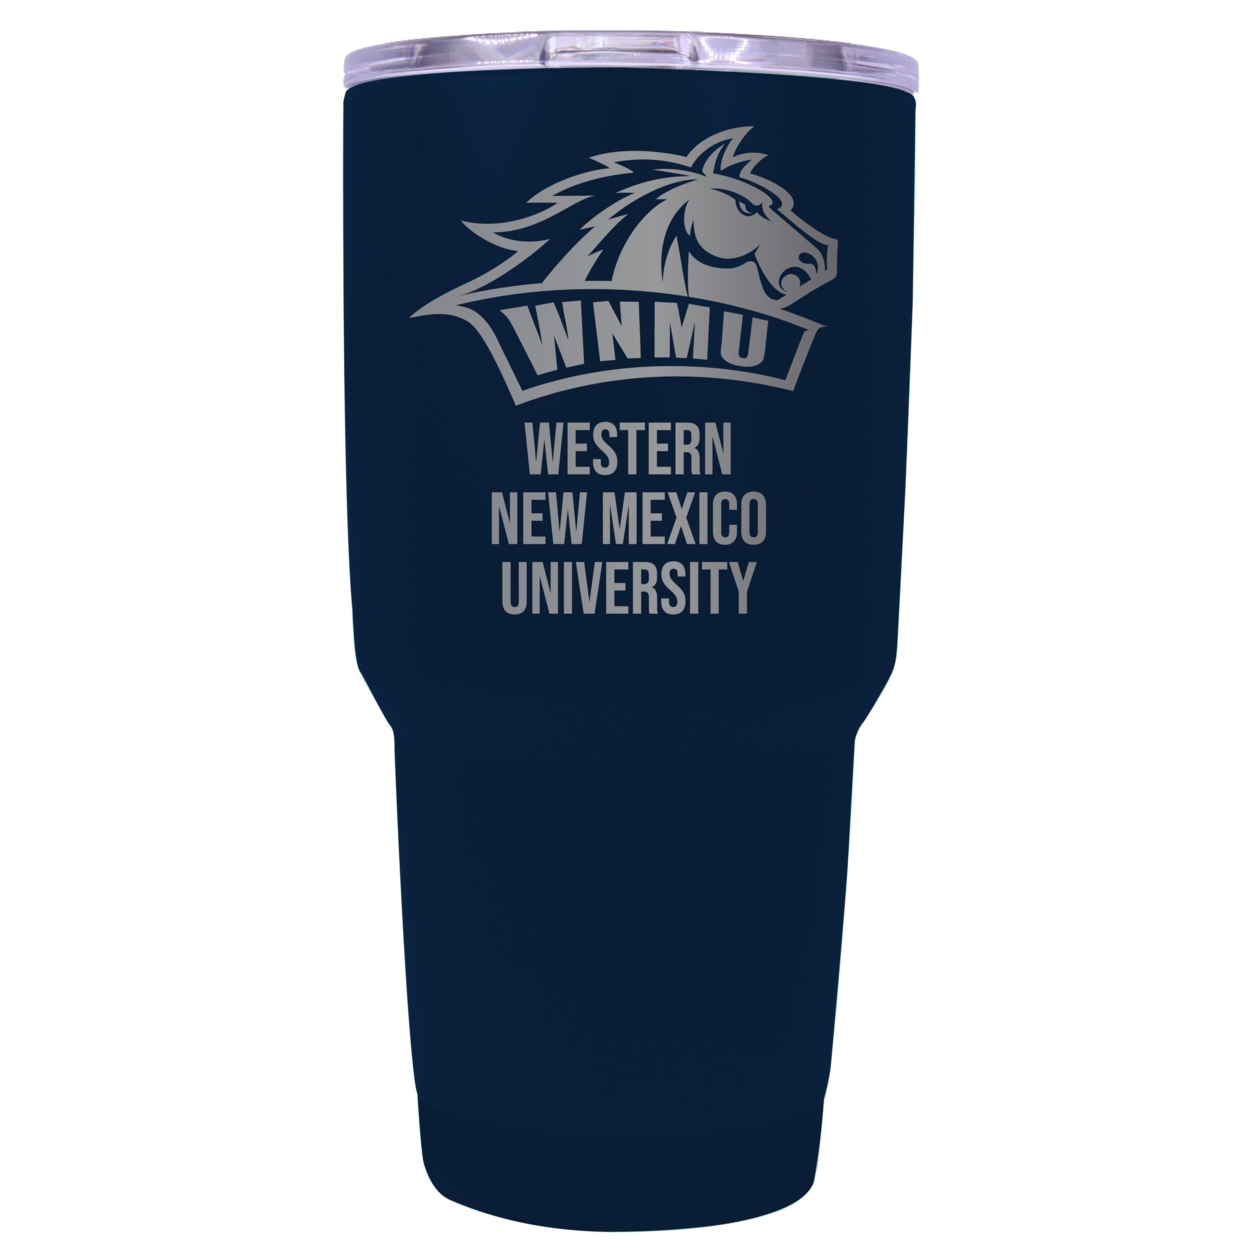 Western New Mexico University 24 Oz Laser Engraved Stainless Steel Insulated Tumbler - Choose Your Color. - Seafoam